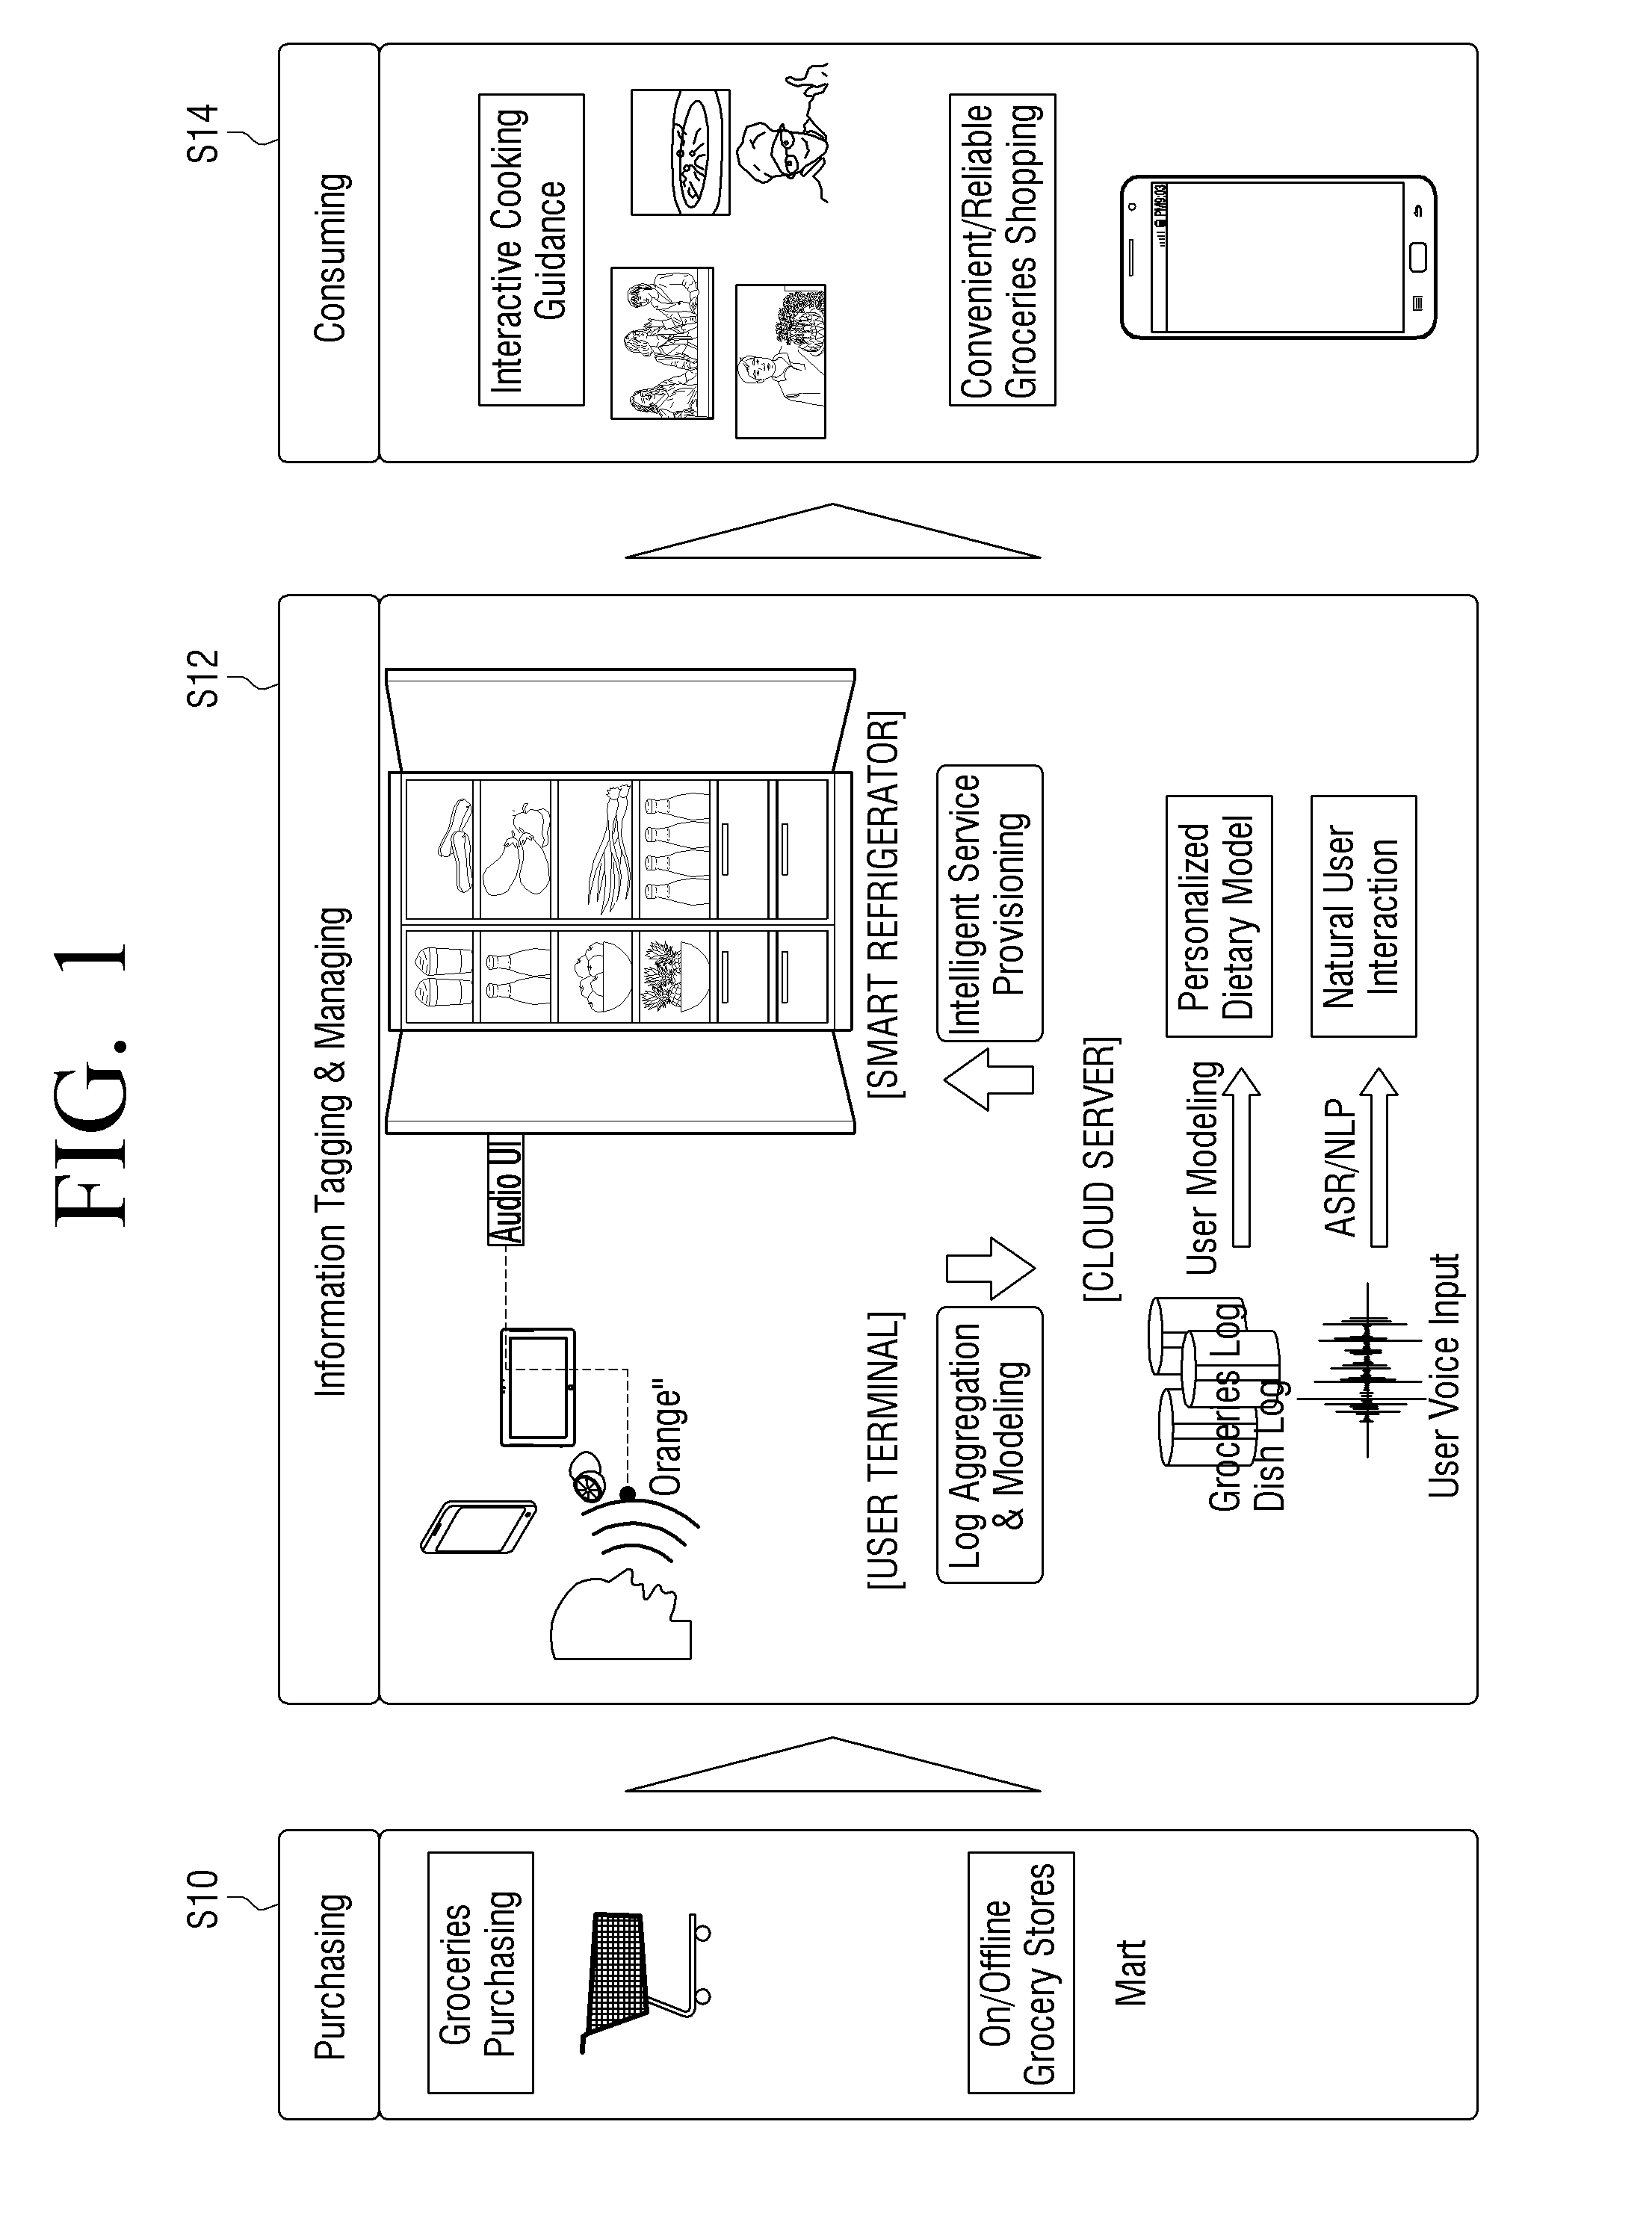 Method and apparatus for providing customized food life service